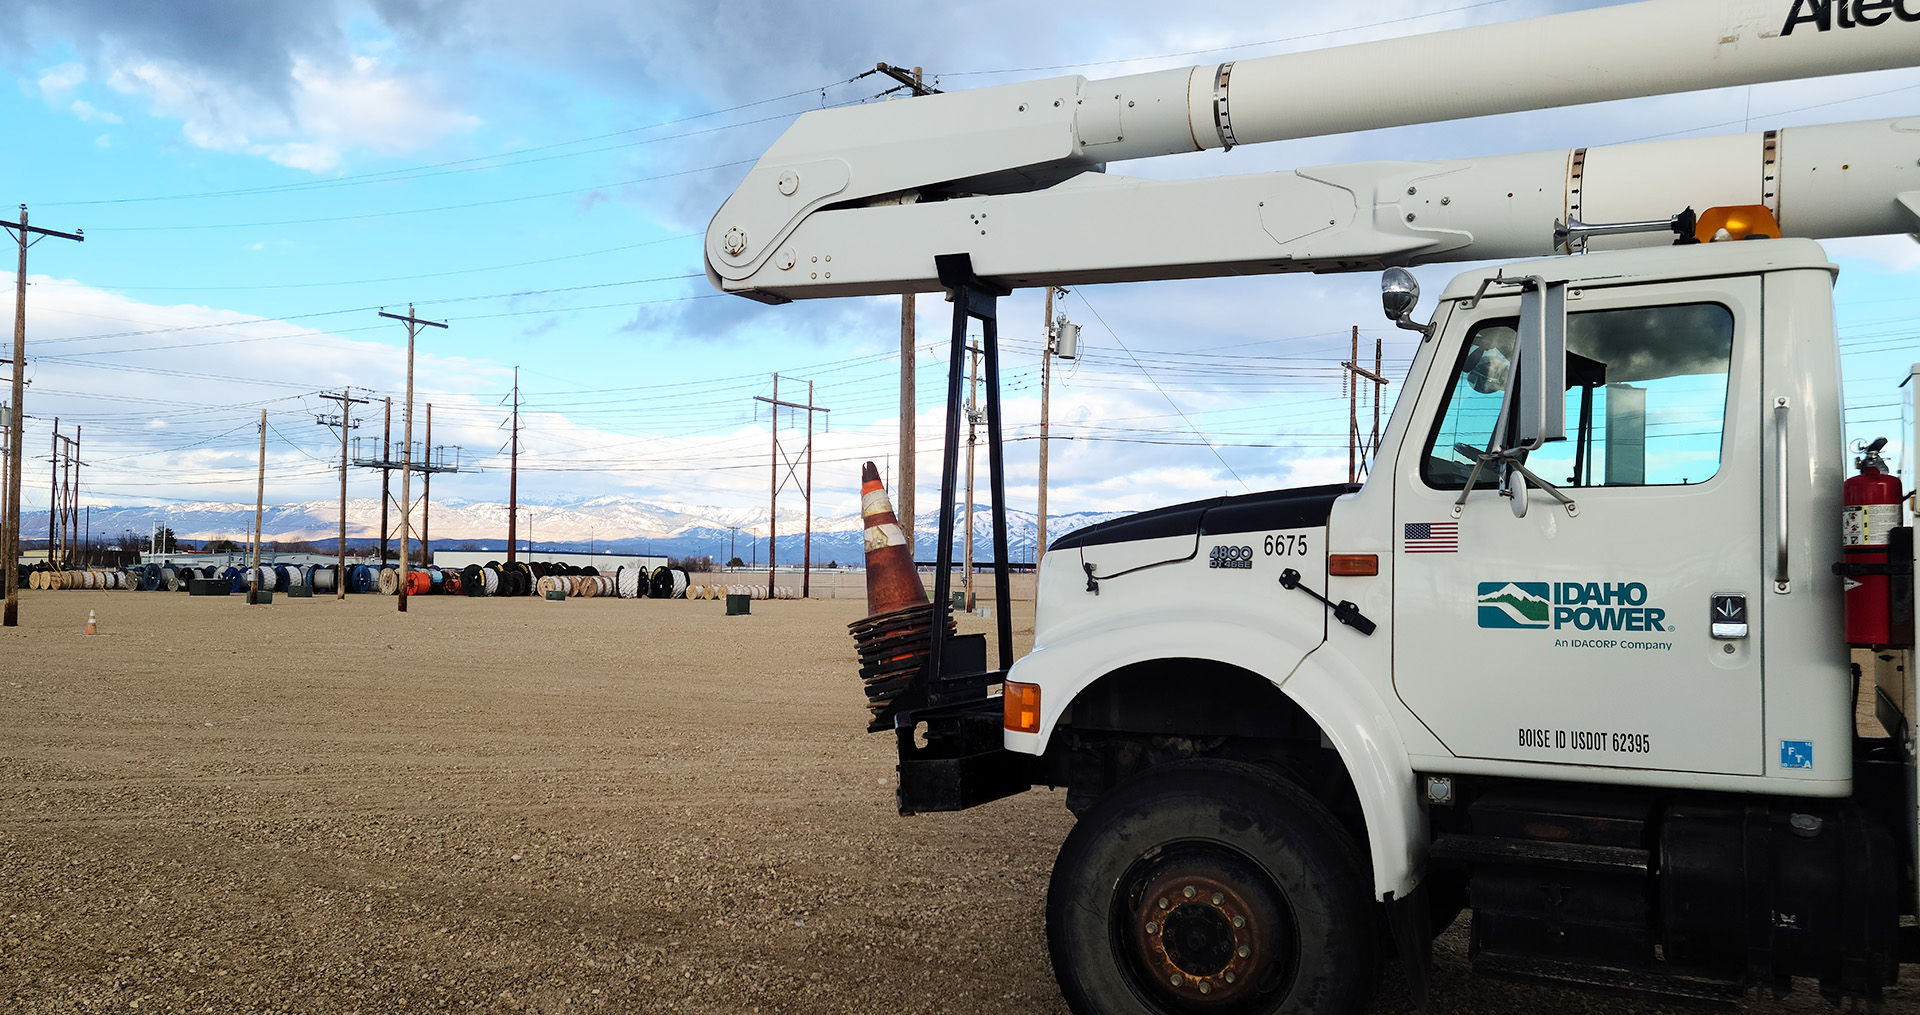 Image of a Idaho Power truck nearby power lines in a training yard